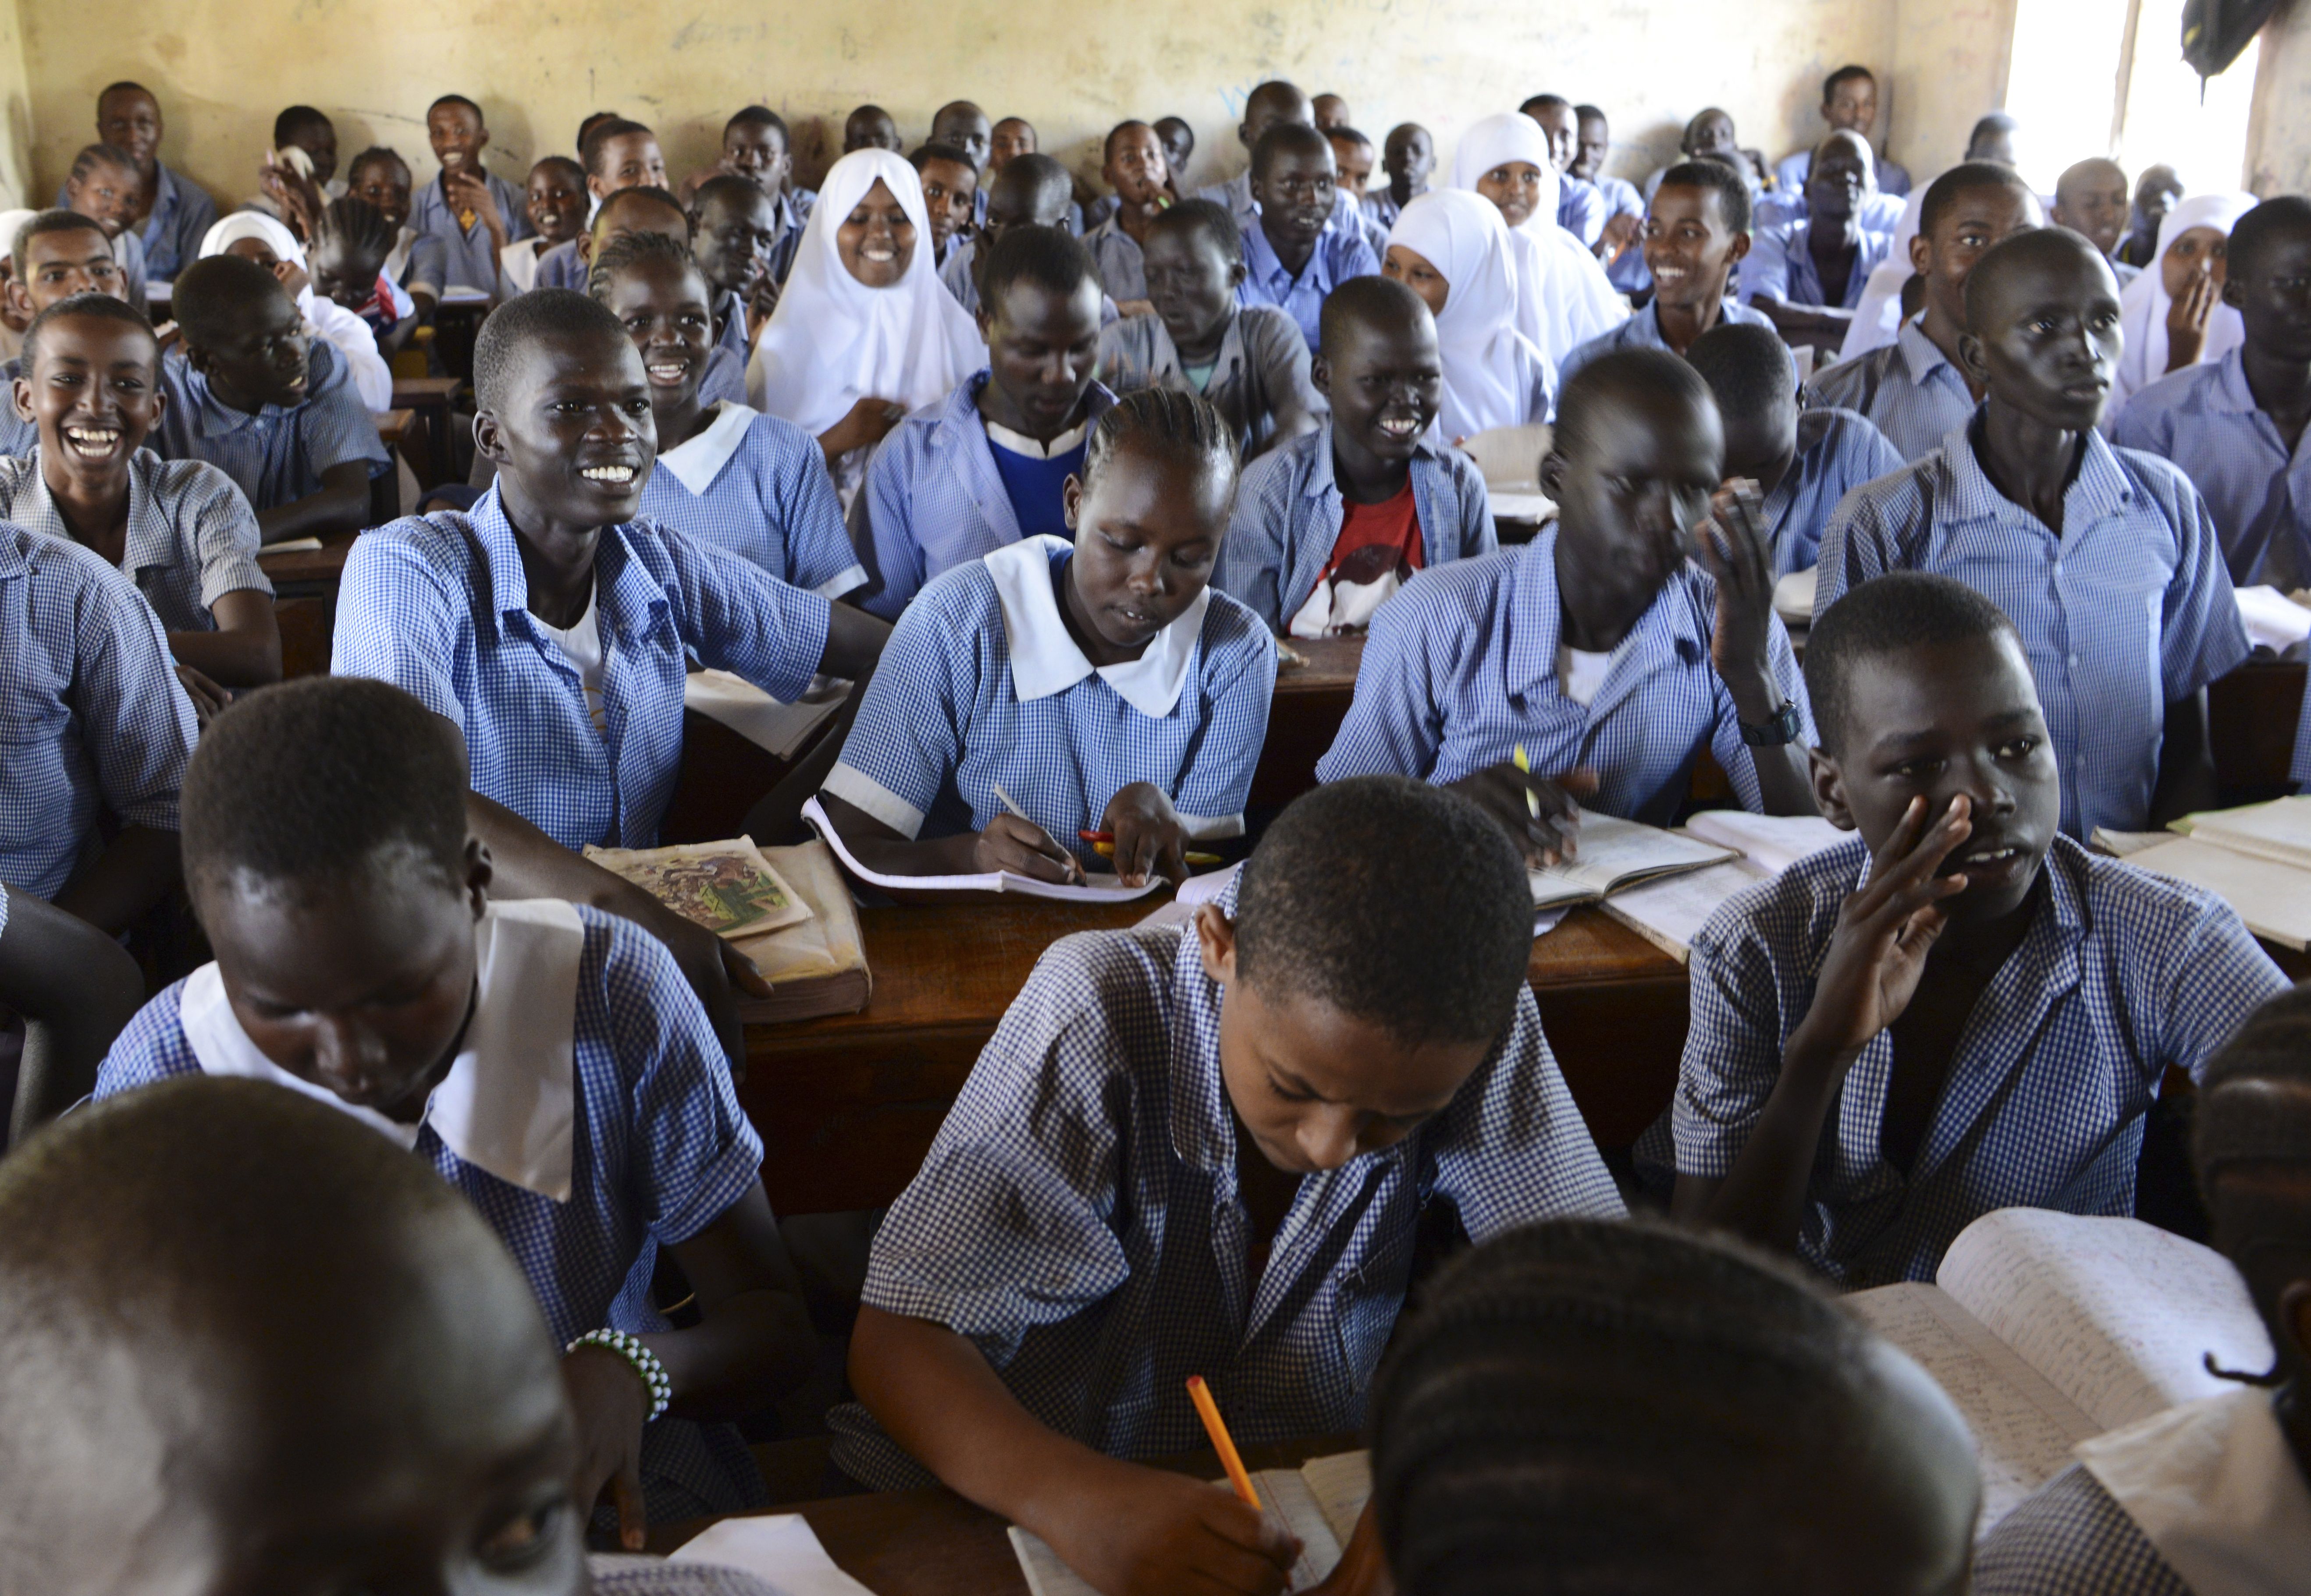 In Kakuma, it is common for students of many ages to learn together in a single classroom. Image by Rodger Bosch for UNICEF USA. Kenya, 2018.